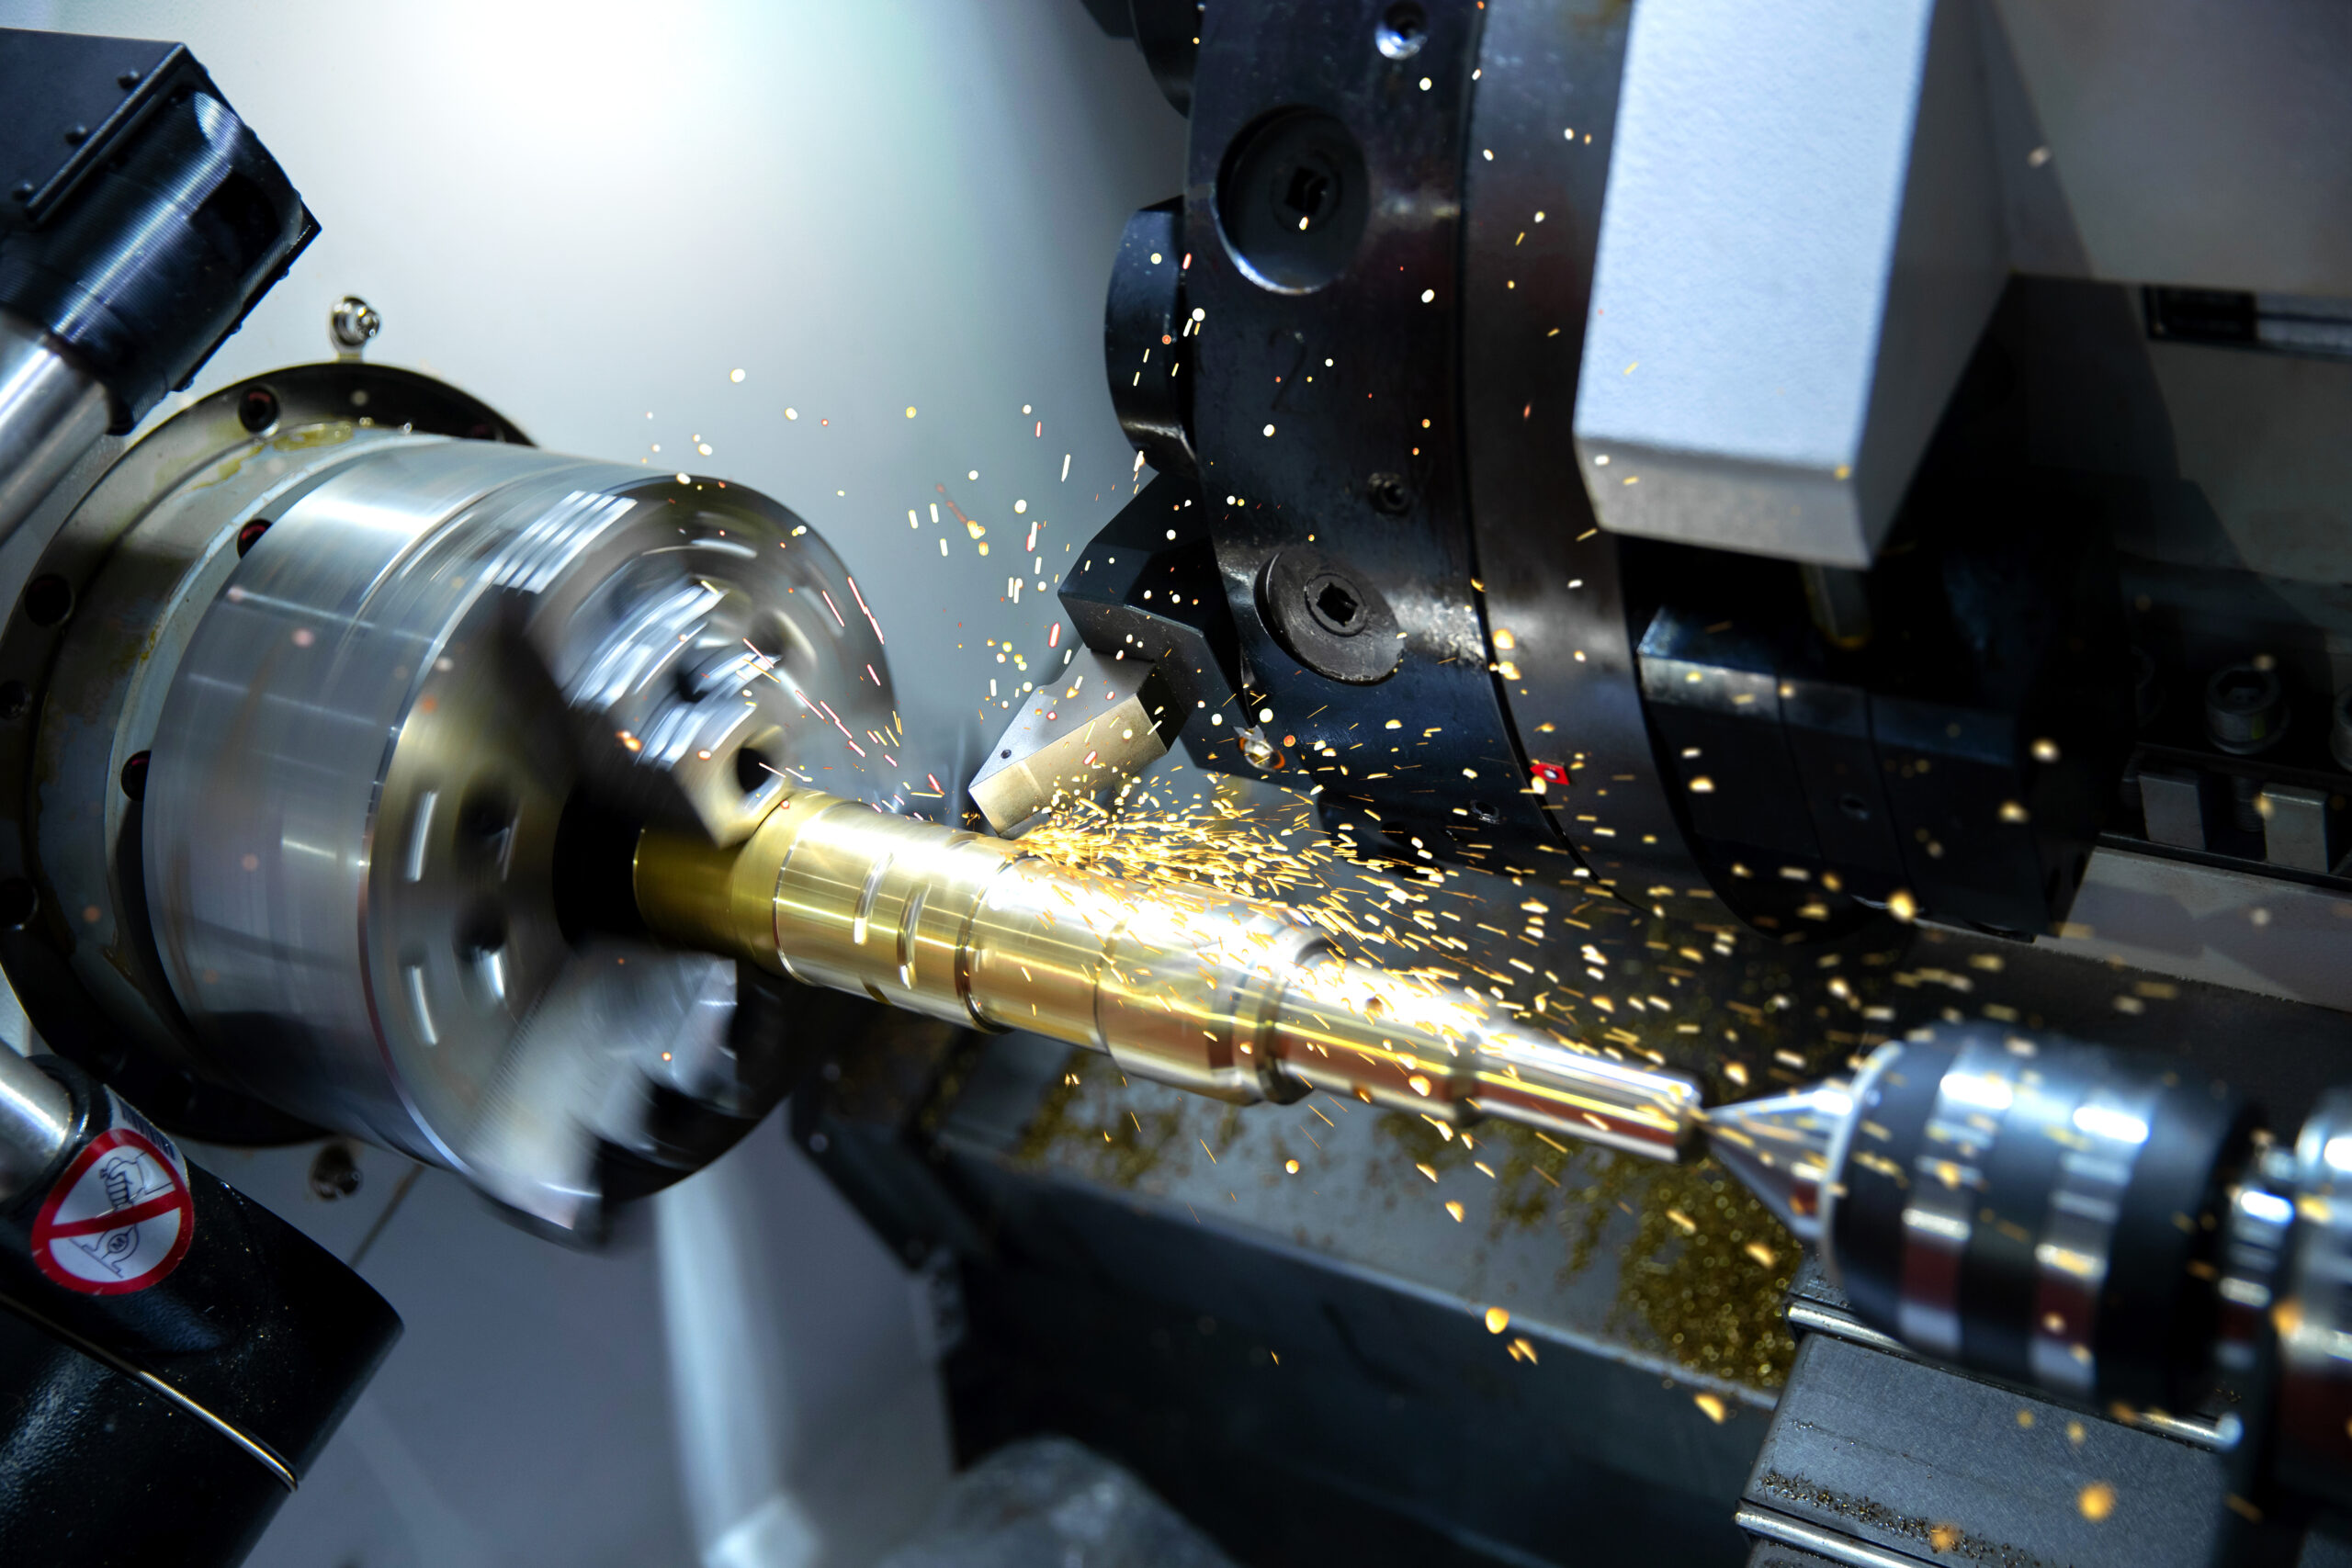 Industry,Milling,Mechanical,Turning,Metal,Working,Process,Metals,Parts,,manufacturing